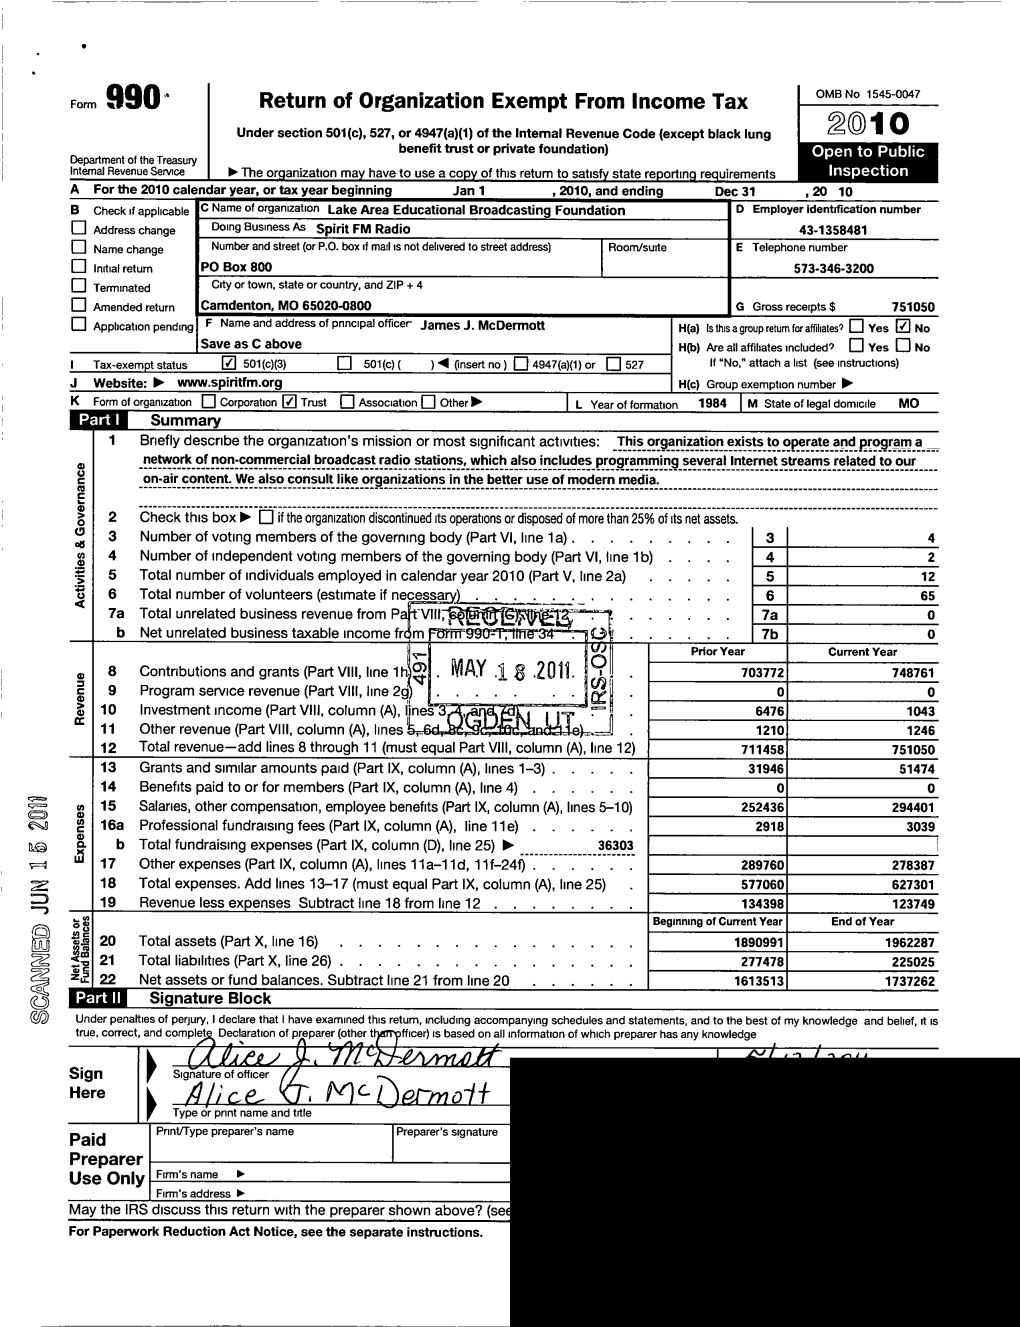 Form 990" Return of Organization Exempt from Income Tax OMB No 1545-0047